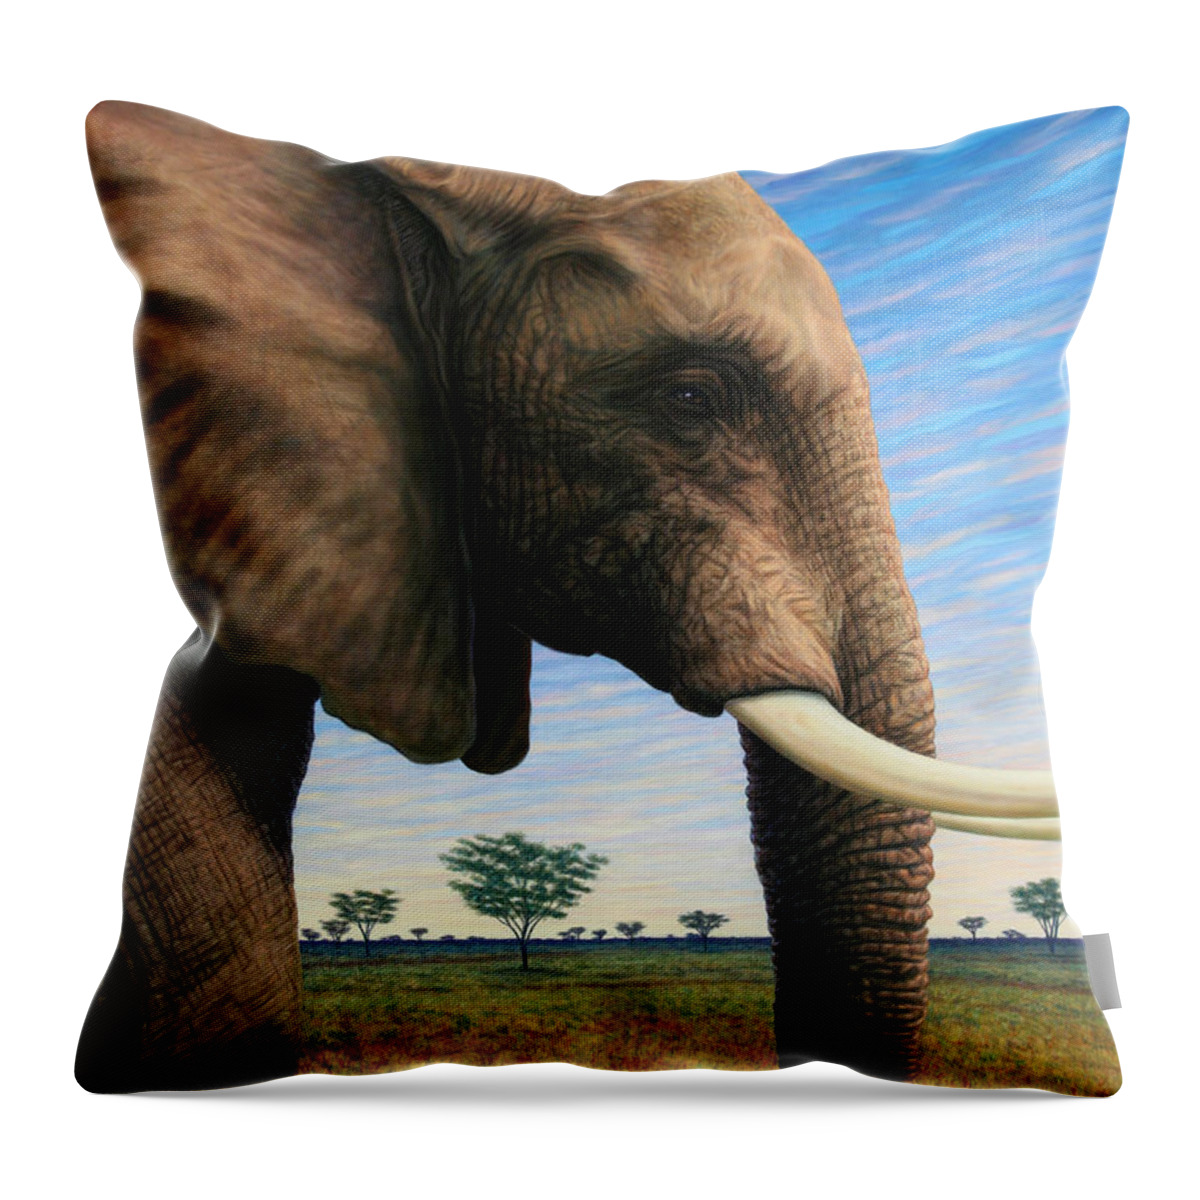 Elephant Throw Pillow featuring the painting Elephant on Safari by James W Johnson